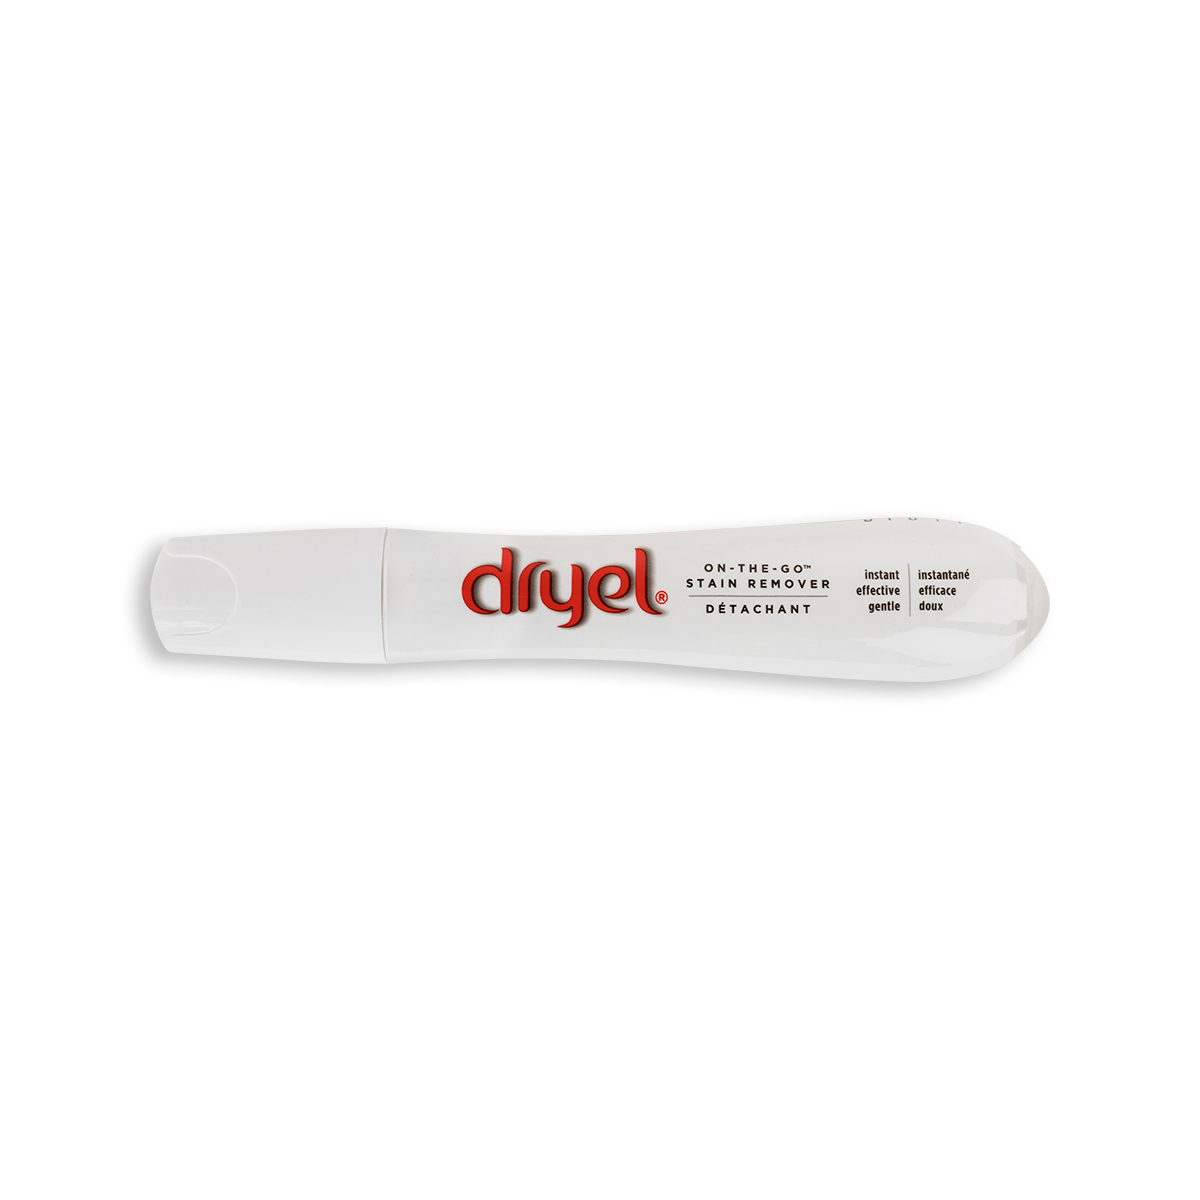 Dryel On The Go Stain Remover Pen - Cleaner's Supply